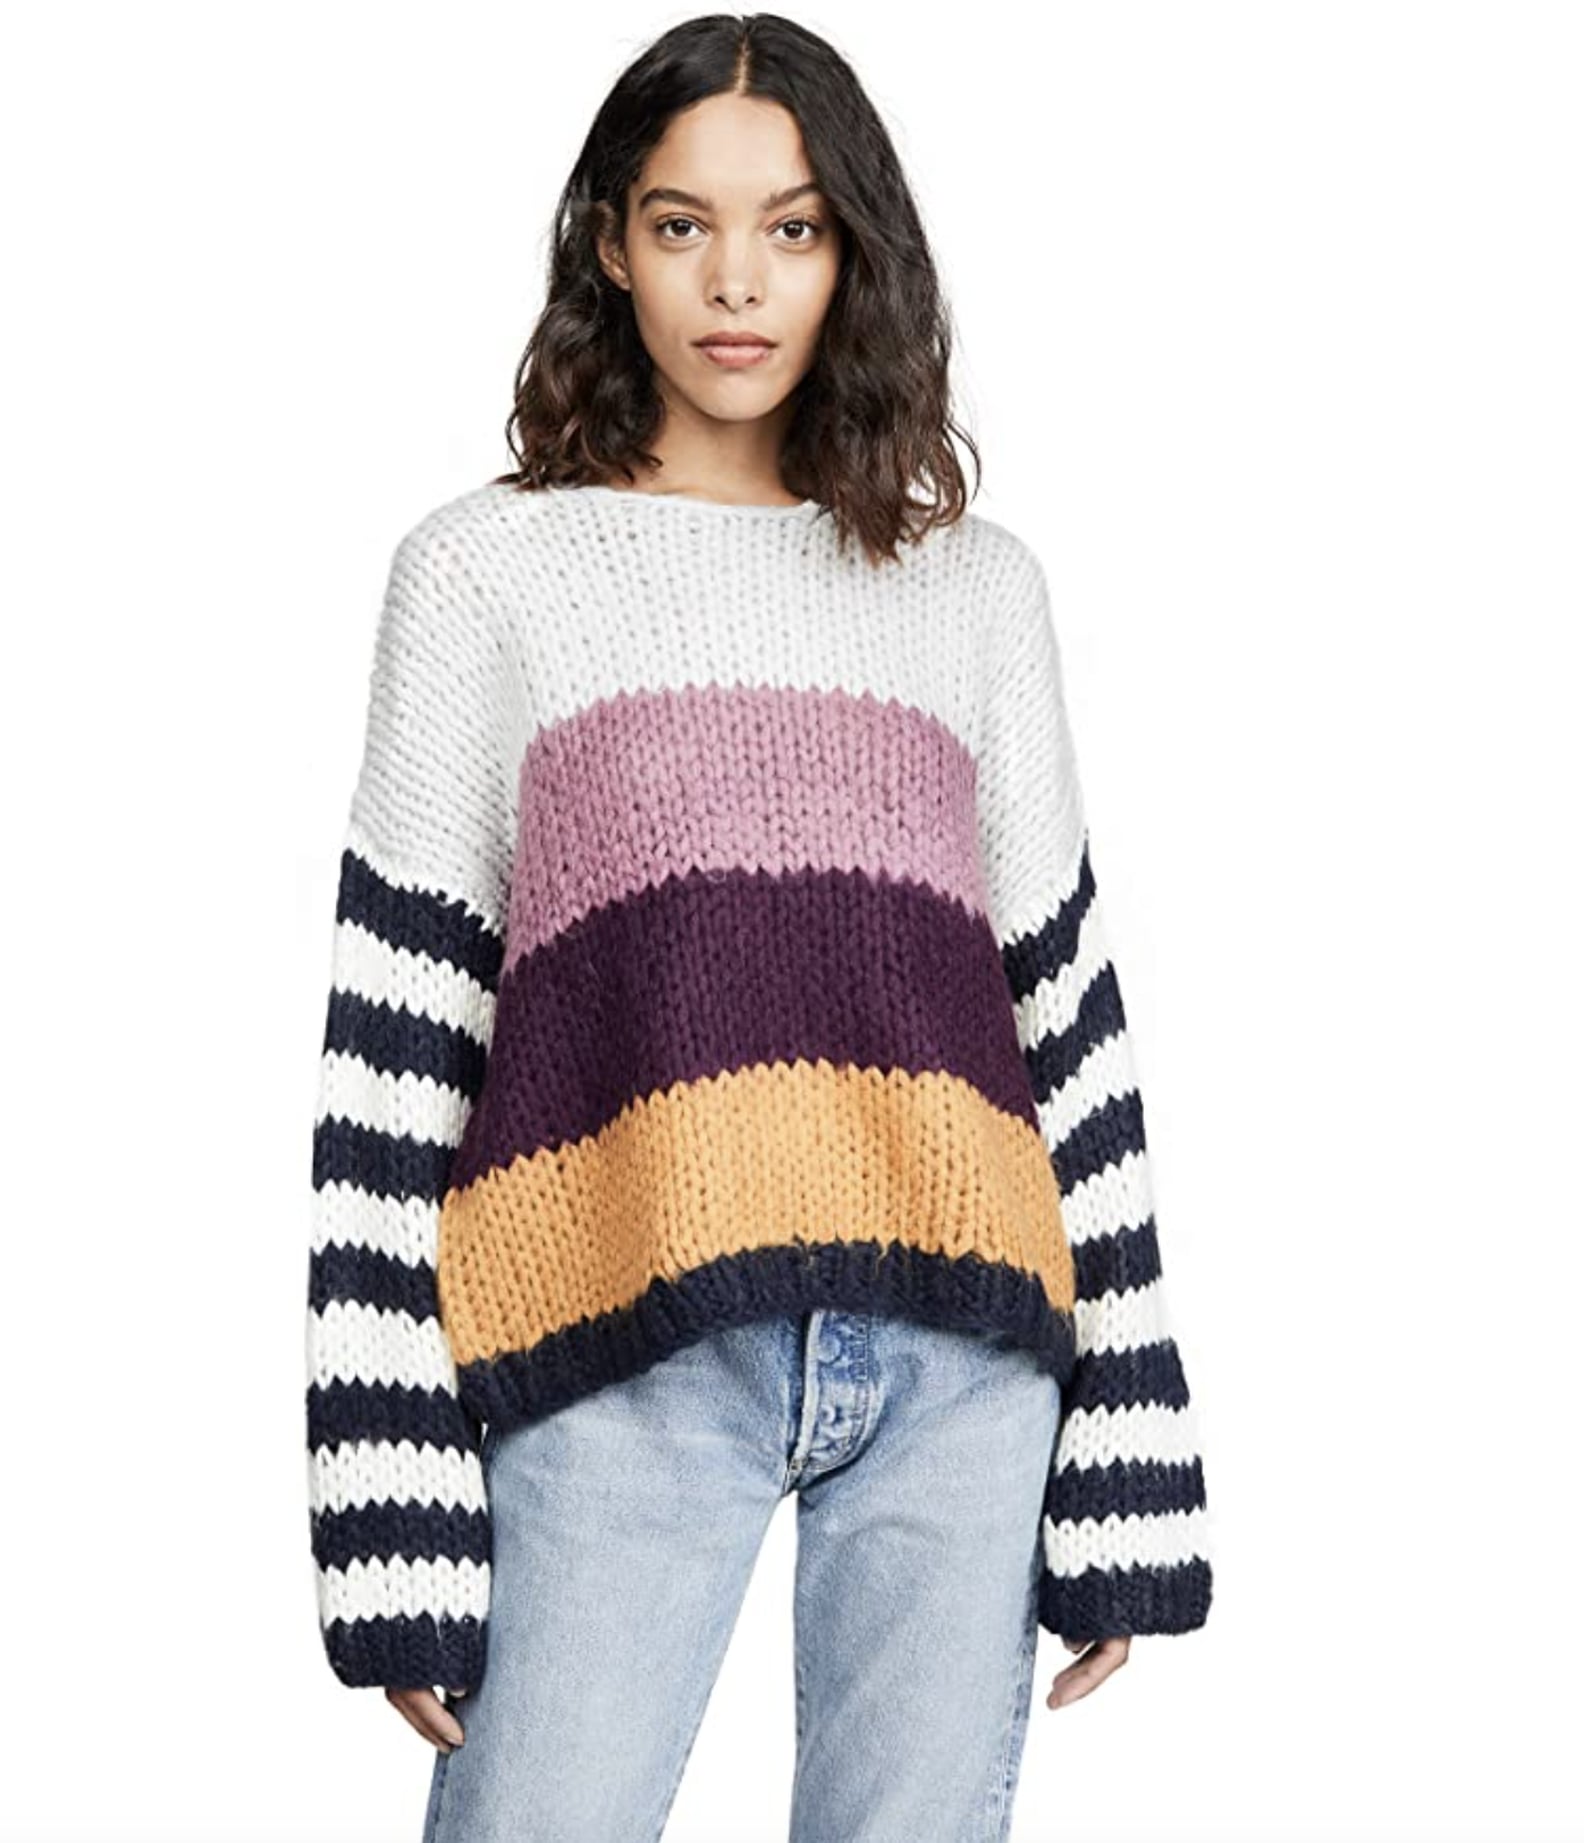 The Best Amazon Fashion Sweaters to Shop For Fall | POPSUGAR Fashion